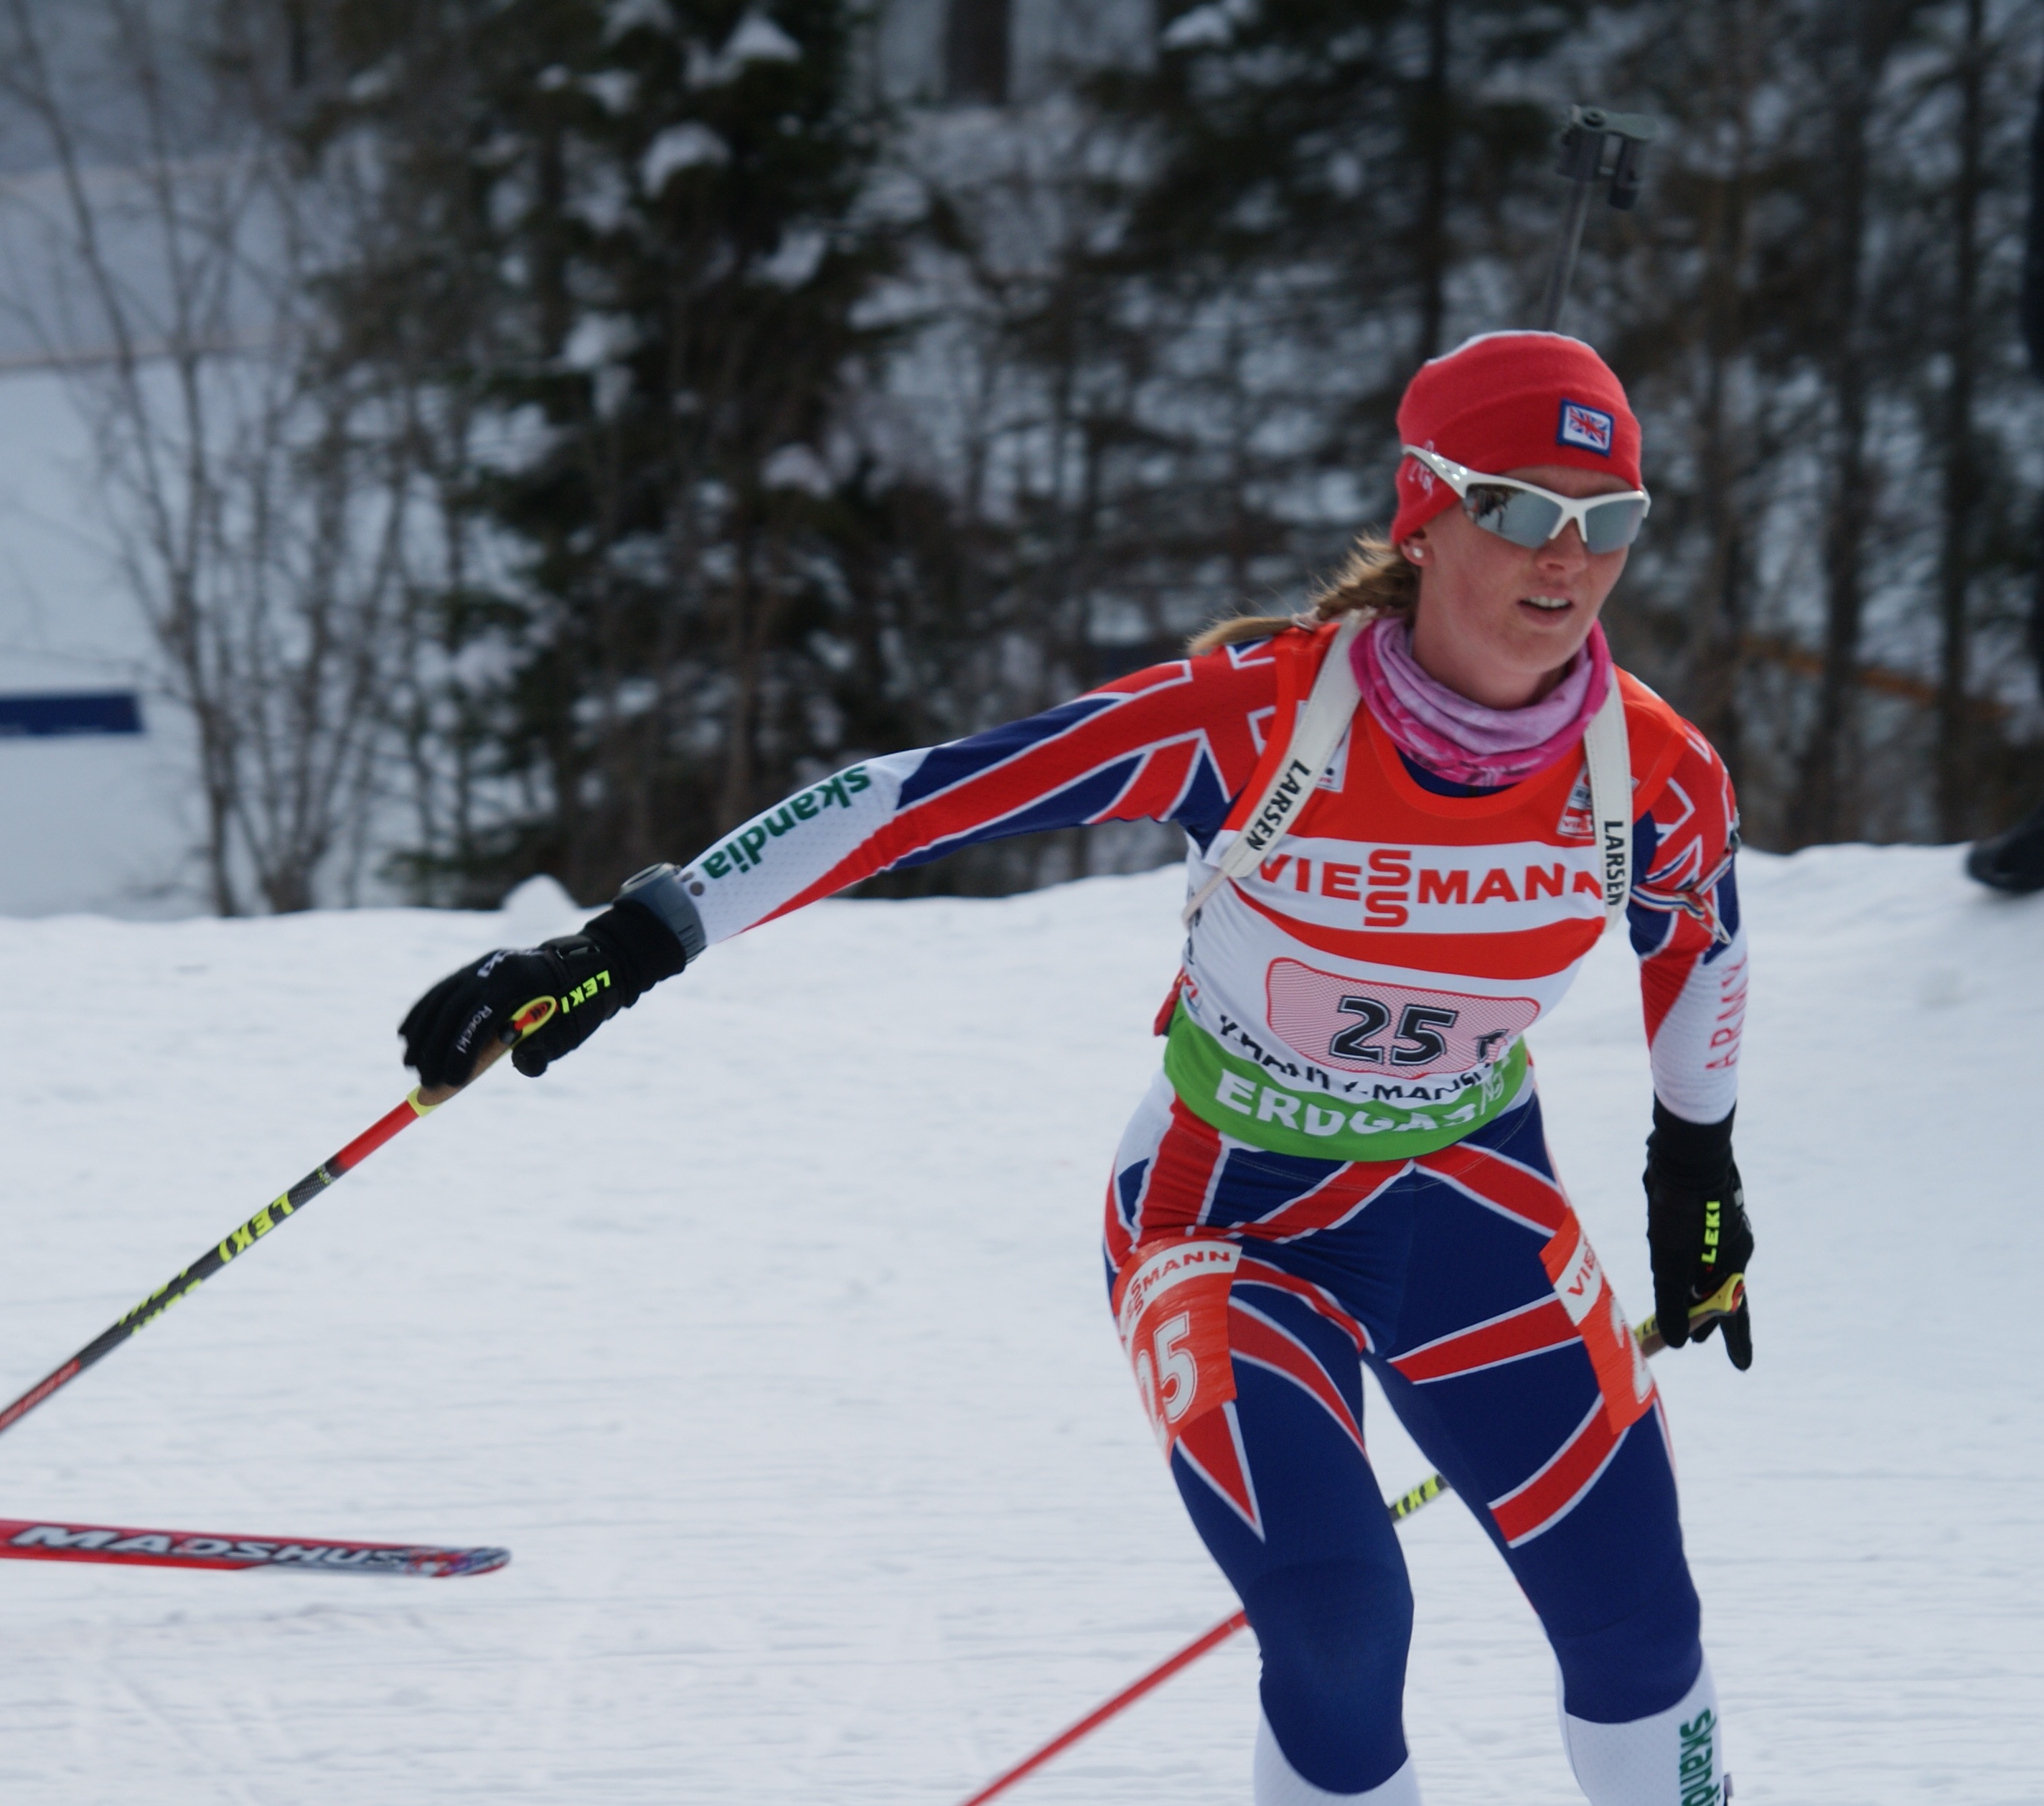 Lightfoot Notches 34th At World Champs, A Best for Britain